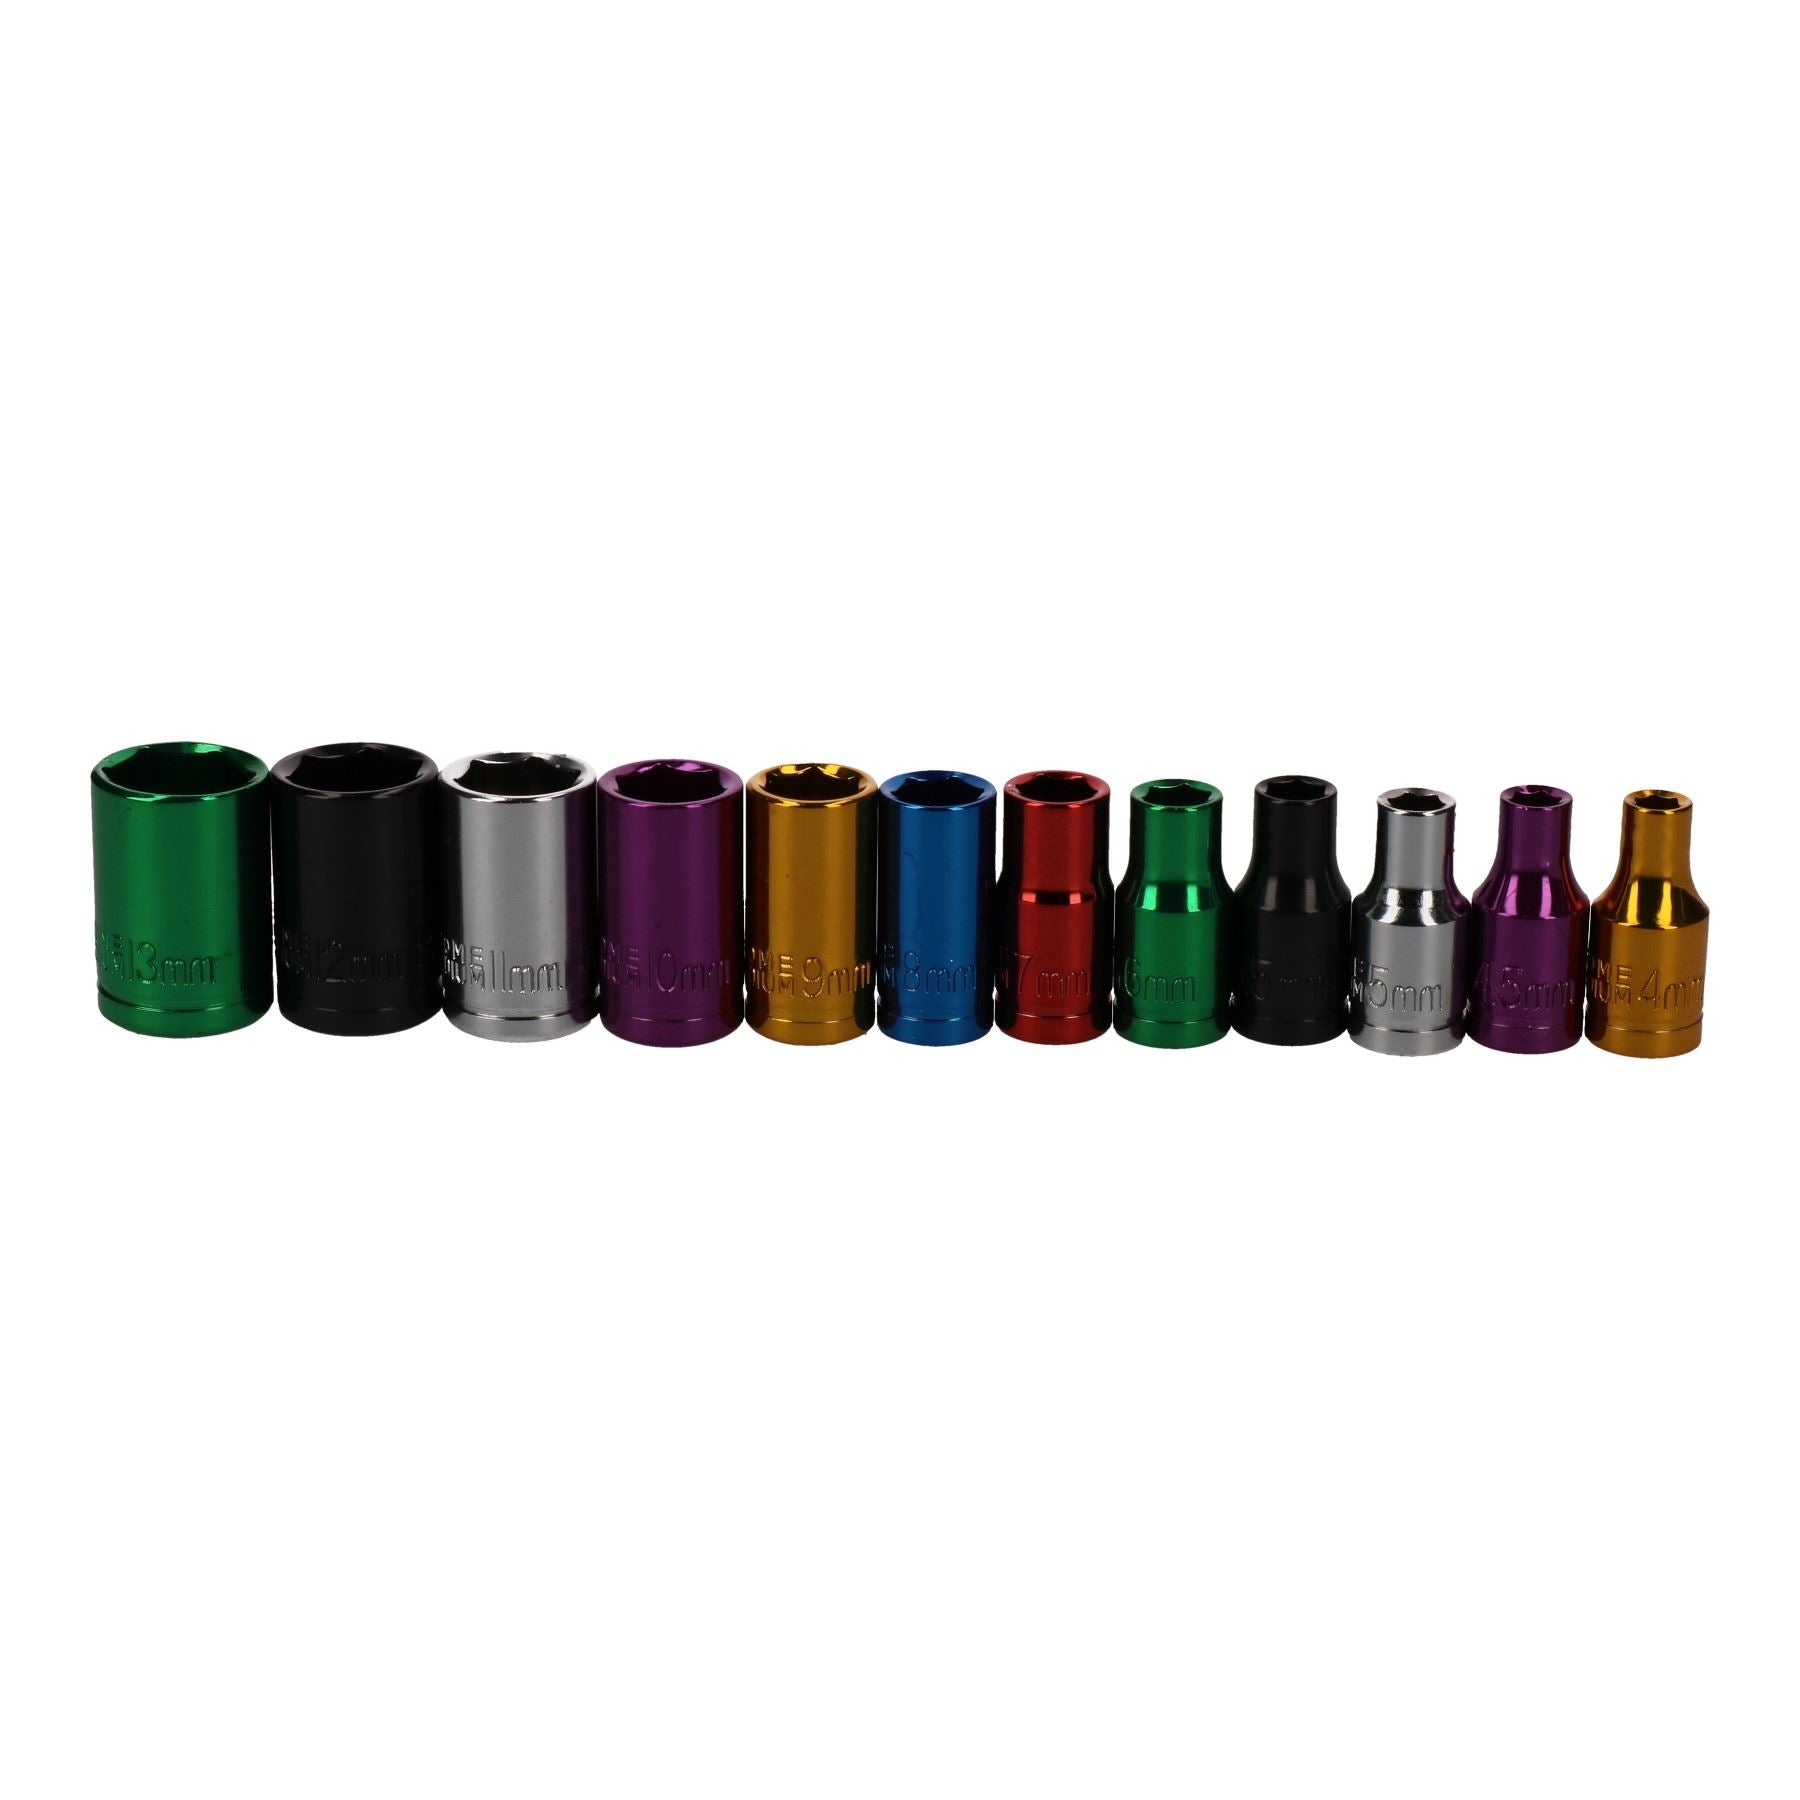 24pc Coloured 1/4" Dr Shallow & Deep Sockets 6 Point Hex Metric 4 - 13mm Rails